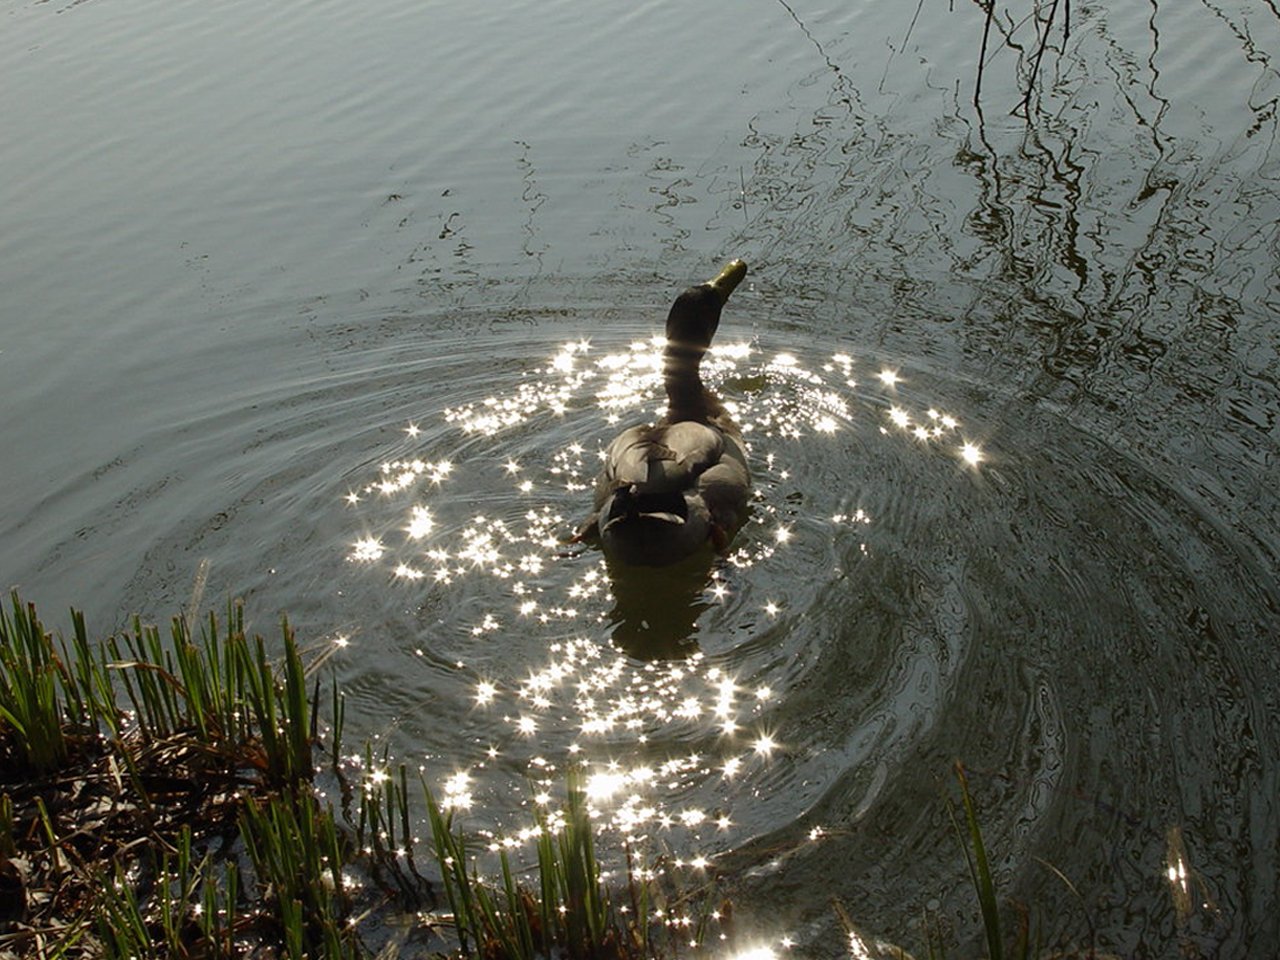 there is a duck that is swimming in the lake